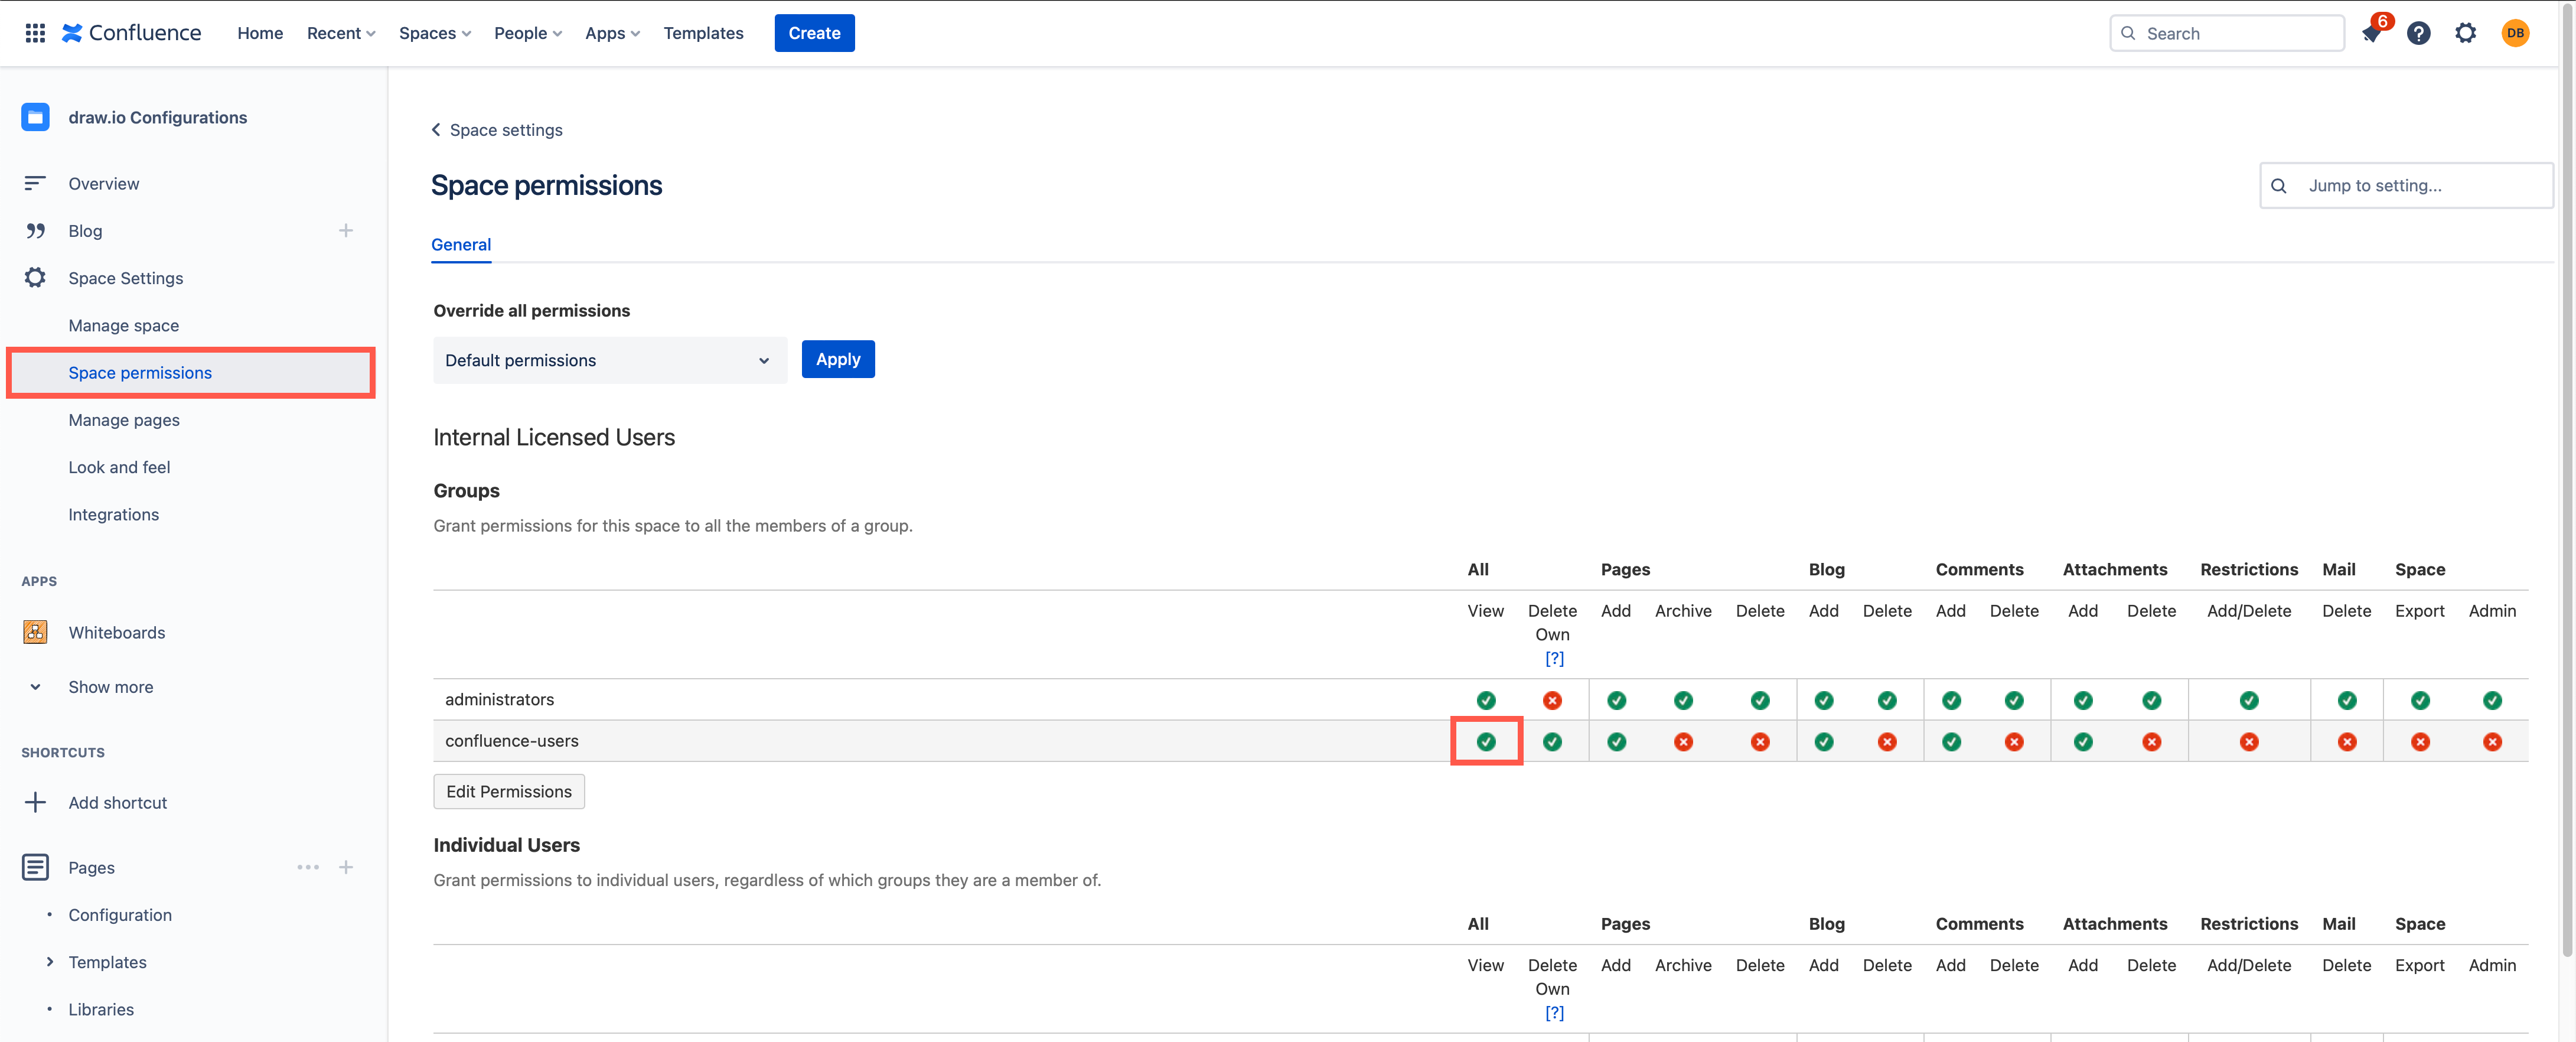 Set your users Read or View permission to the draw.io Configuration space in your Confluence instance to allow access to custom shape libraries and templates